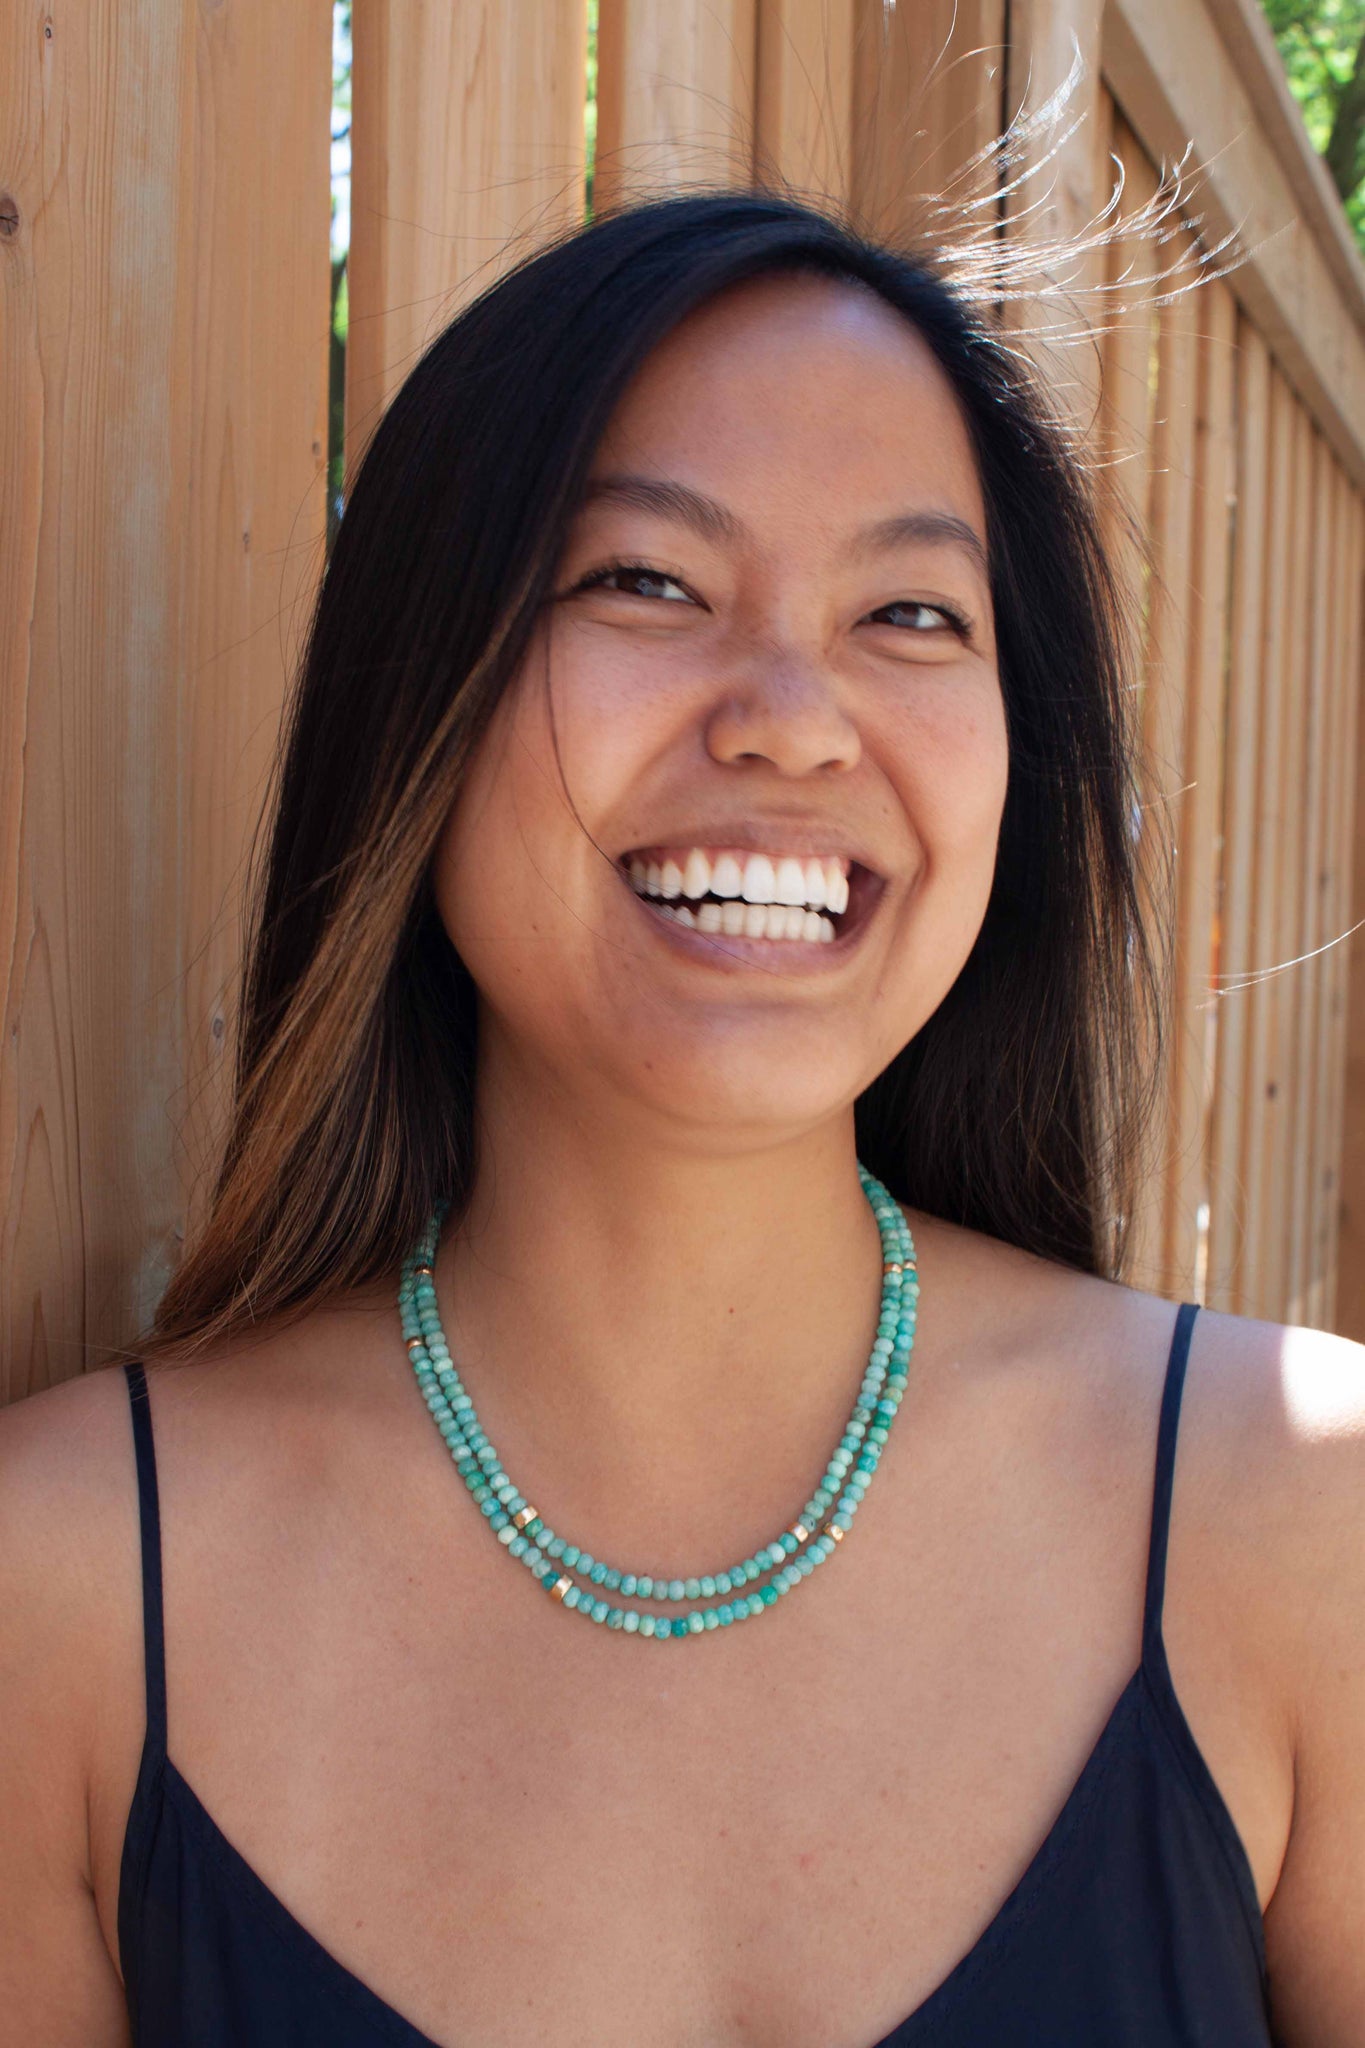 Meet our beautifully long and versatile amazonite & gold necklace that can be worn 4 different ways! 30 inch faceted amazonite and gold beaded necklace (and bracelet if you want to!). Handmade in Toronto by kp jewelry co.